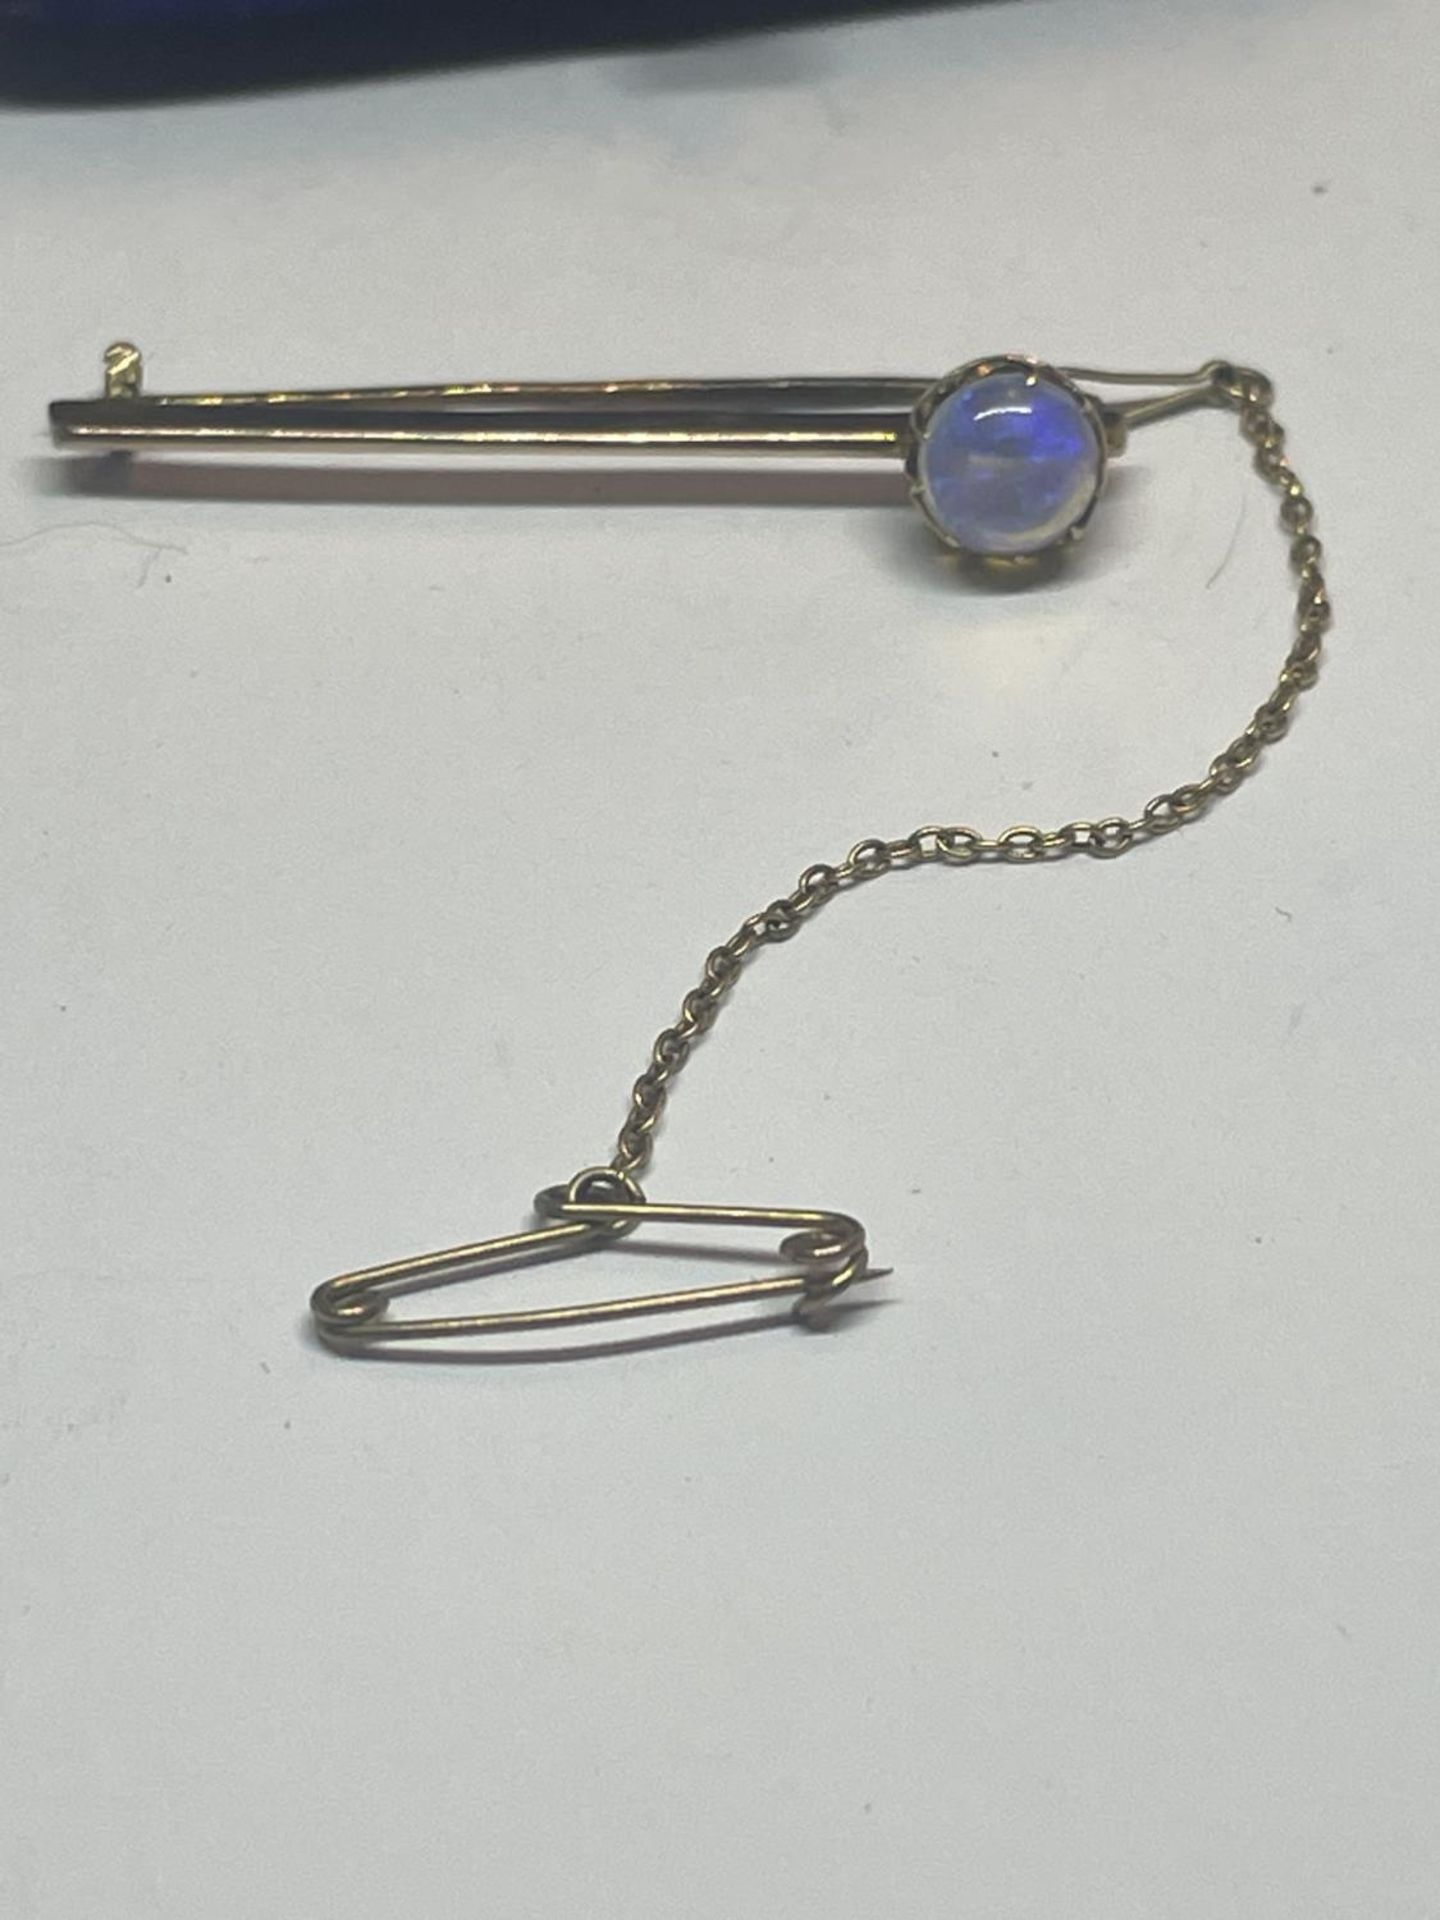 A 9 CARAT GOLD BROOCH WITH OPAL AND A SAFETY CHAIN GROSS WEIGHT 1.92 GRAMS IN A PRESENTATION BOX